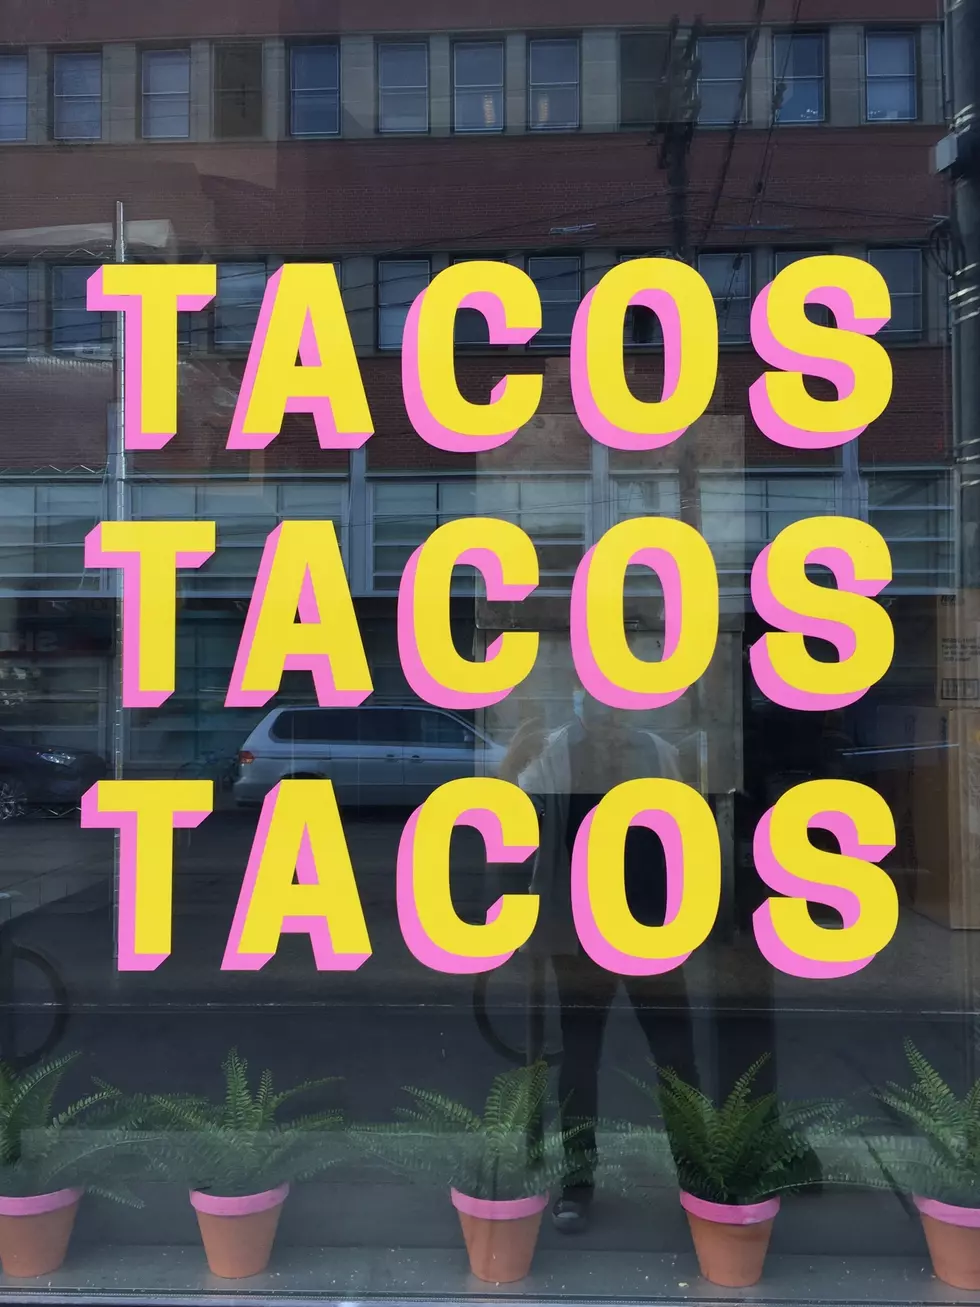 Best Places To Grab Some Tacos In Midland/Odessa On National Taco Day!